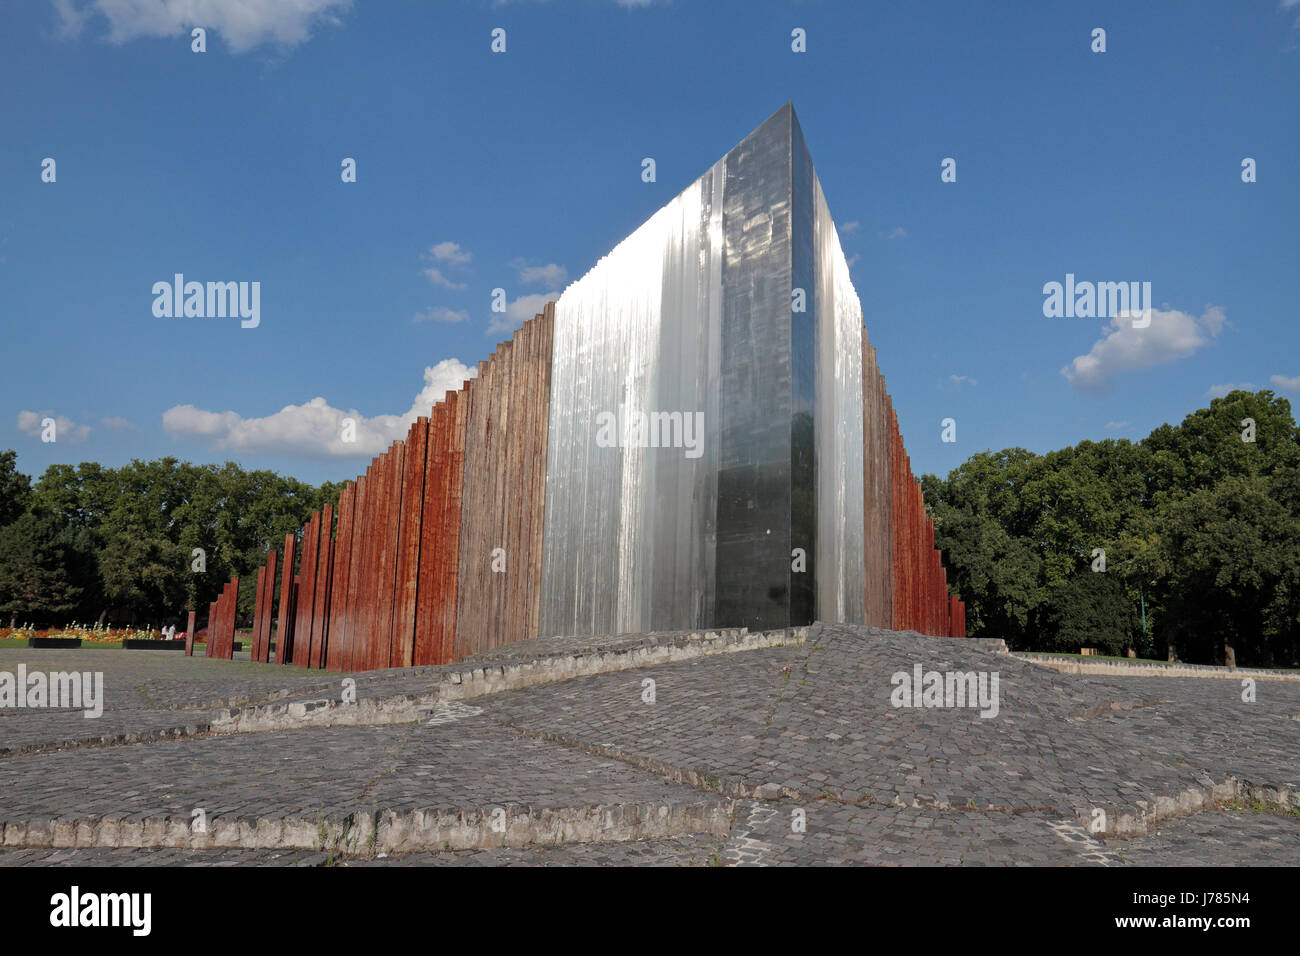 Memorial to the 1956 Hungarian Revolution and War of Independence, Budapest, Hungary. Stock Photo